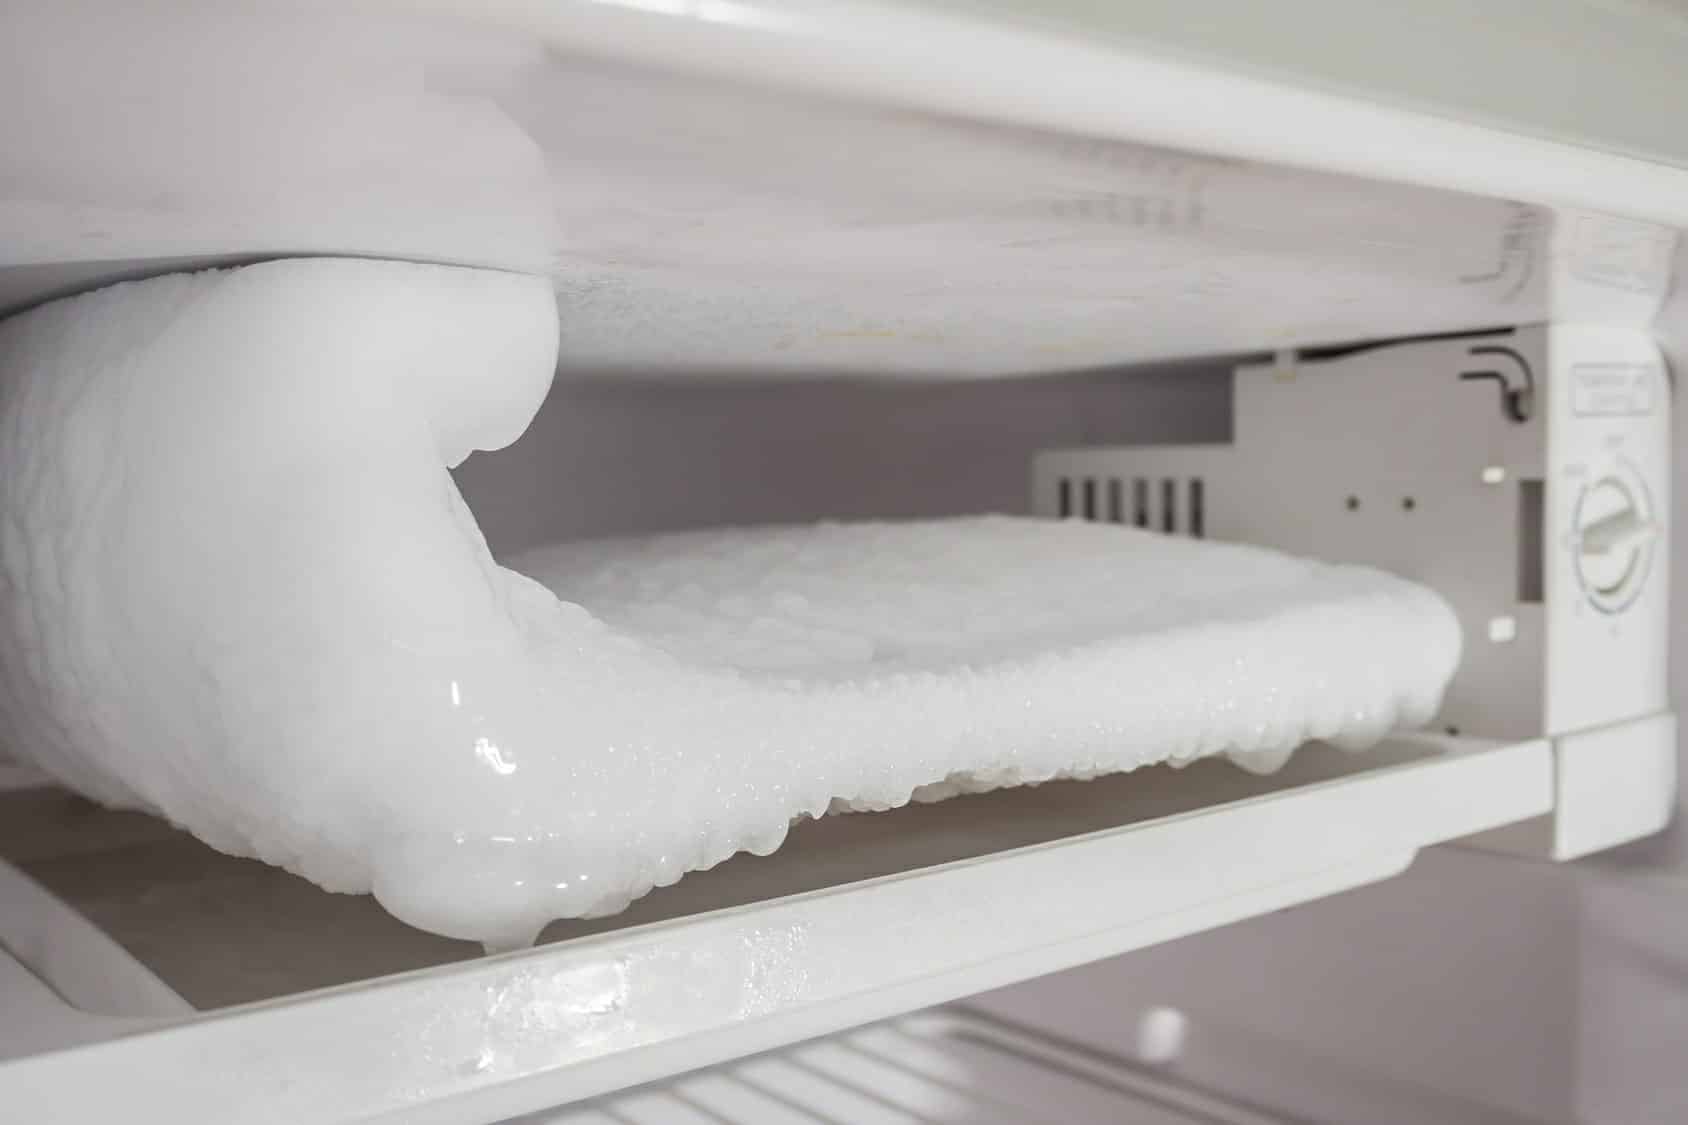 Freezer Building Up Frost: 10 Easy Ways To Fix It Now